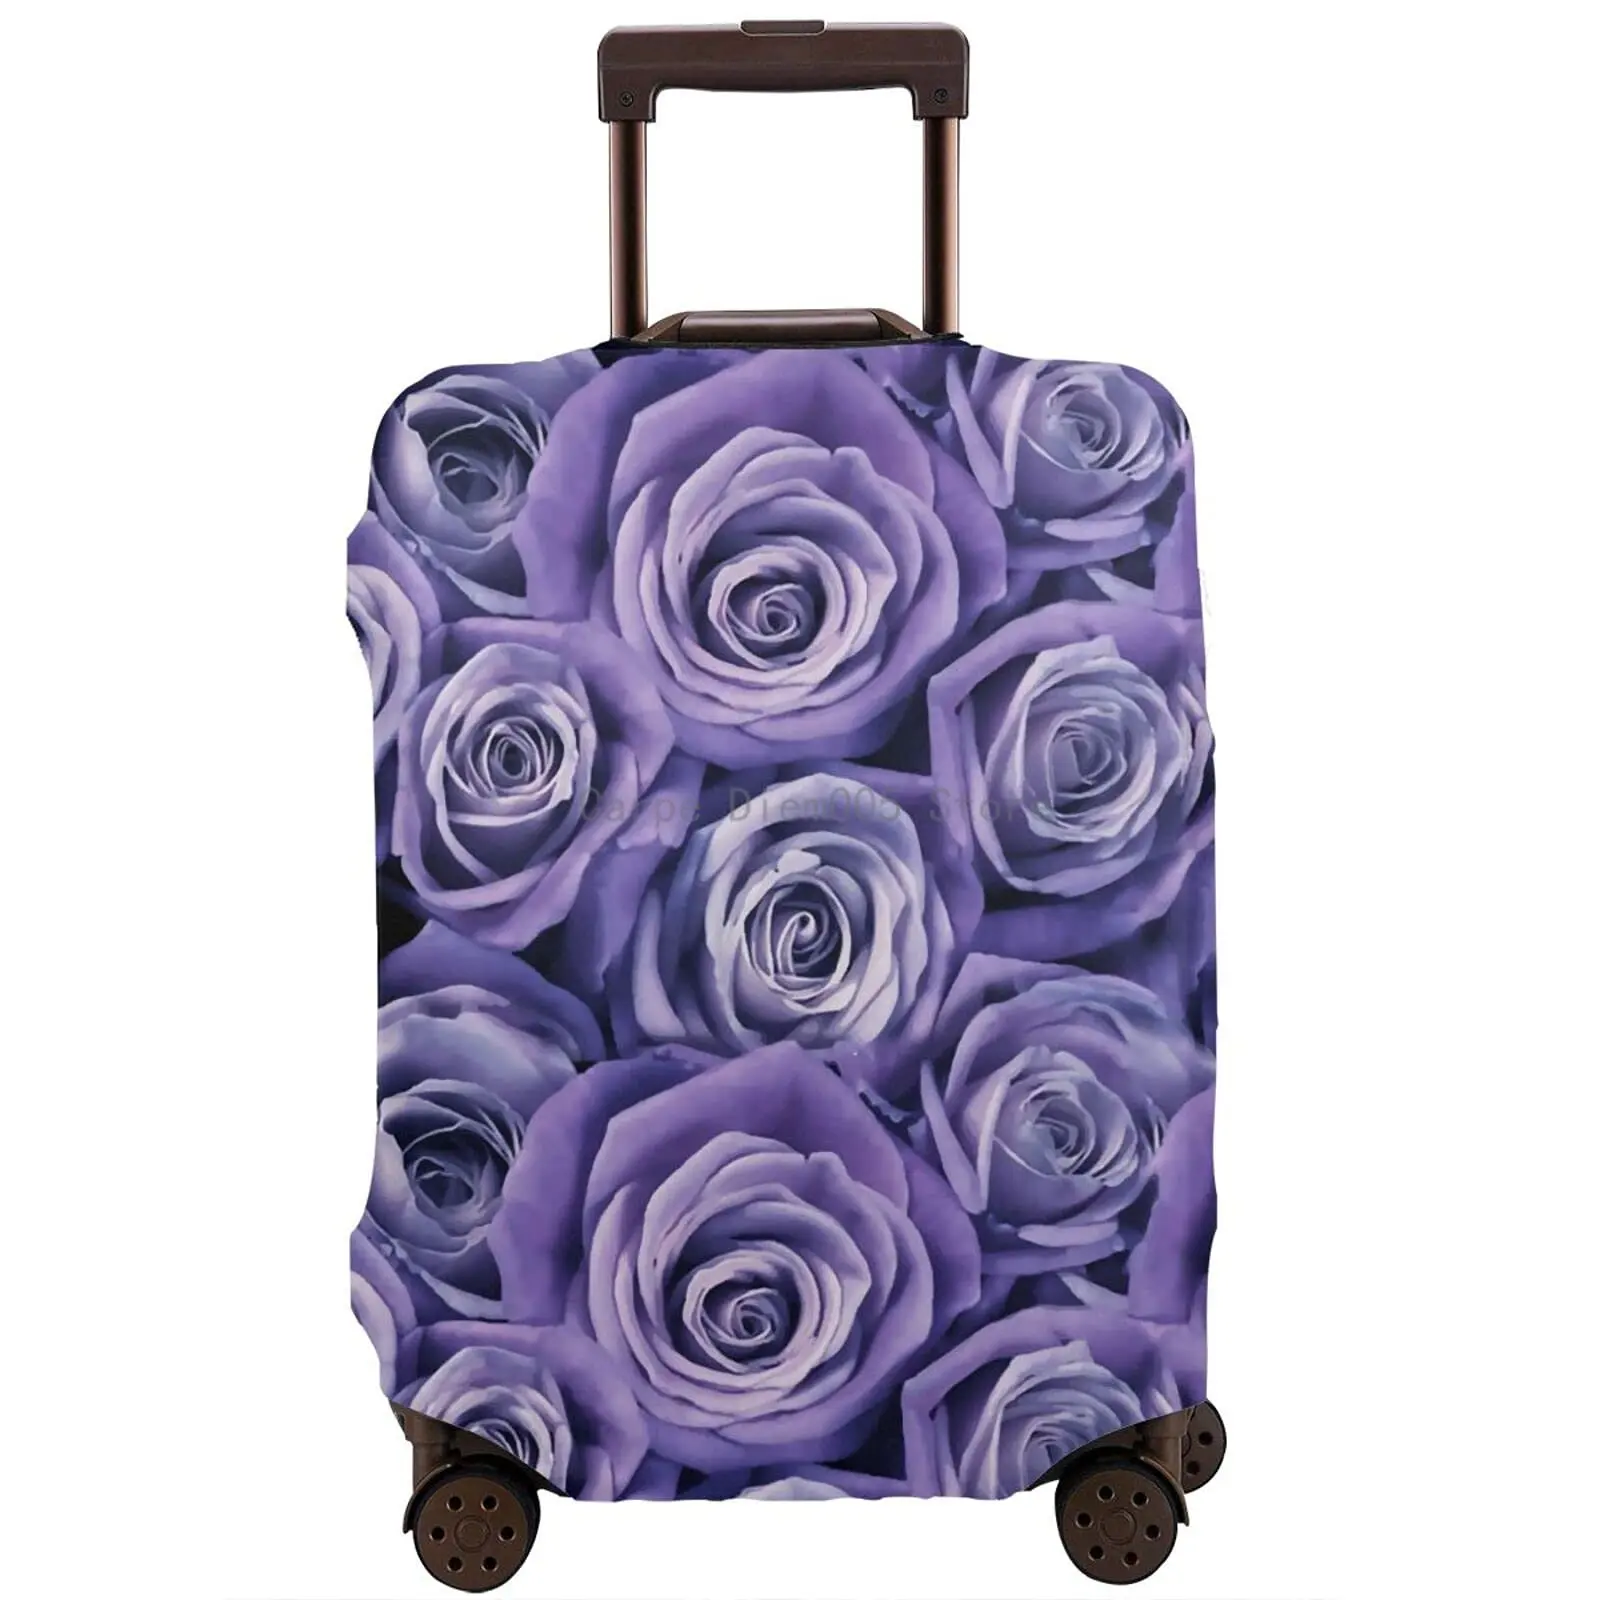 

Roses Purple Baggage Suitcase Cover Dustproof Anti-Scratch Suitcase Protector For Wheeled Trunk Case 18-32 Inch